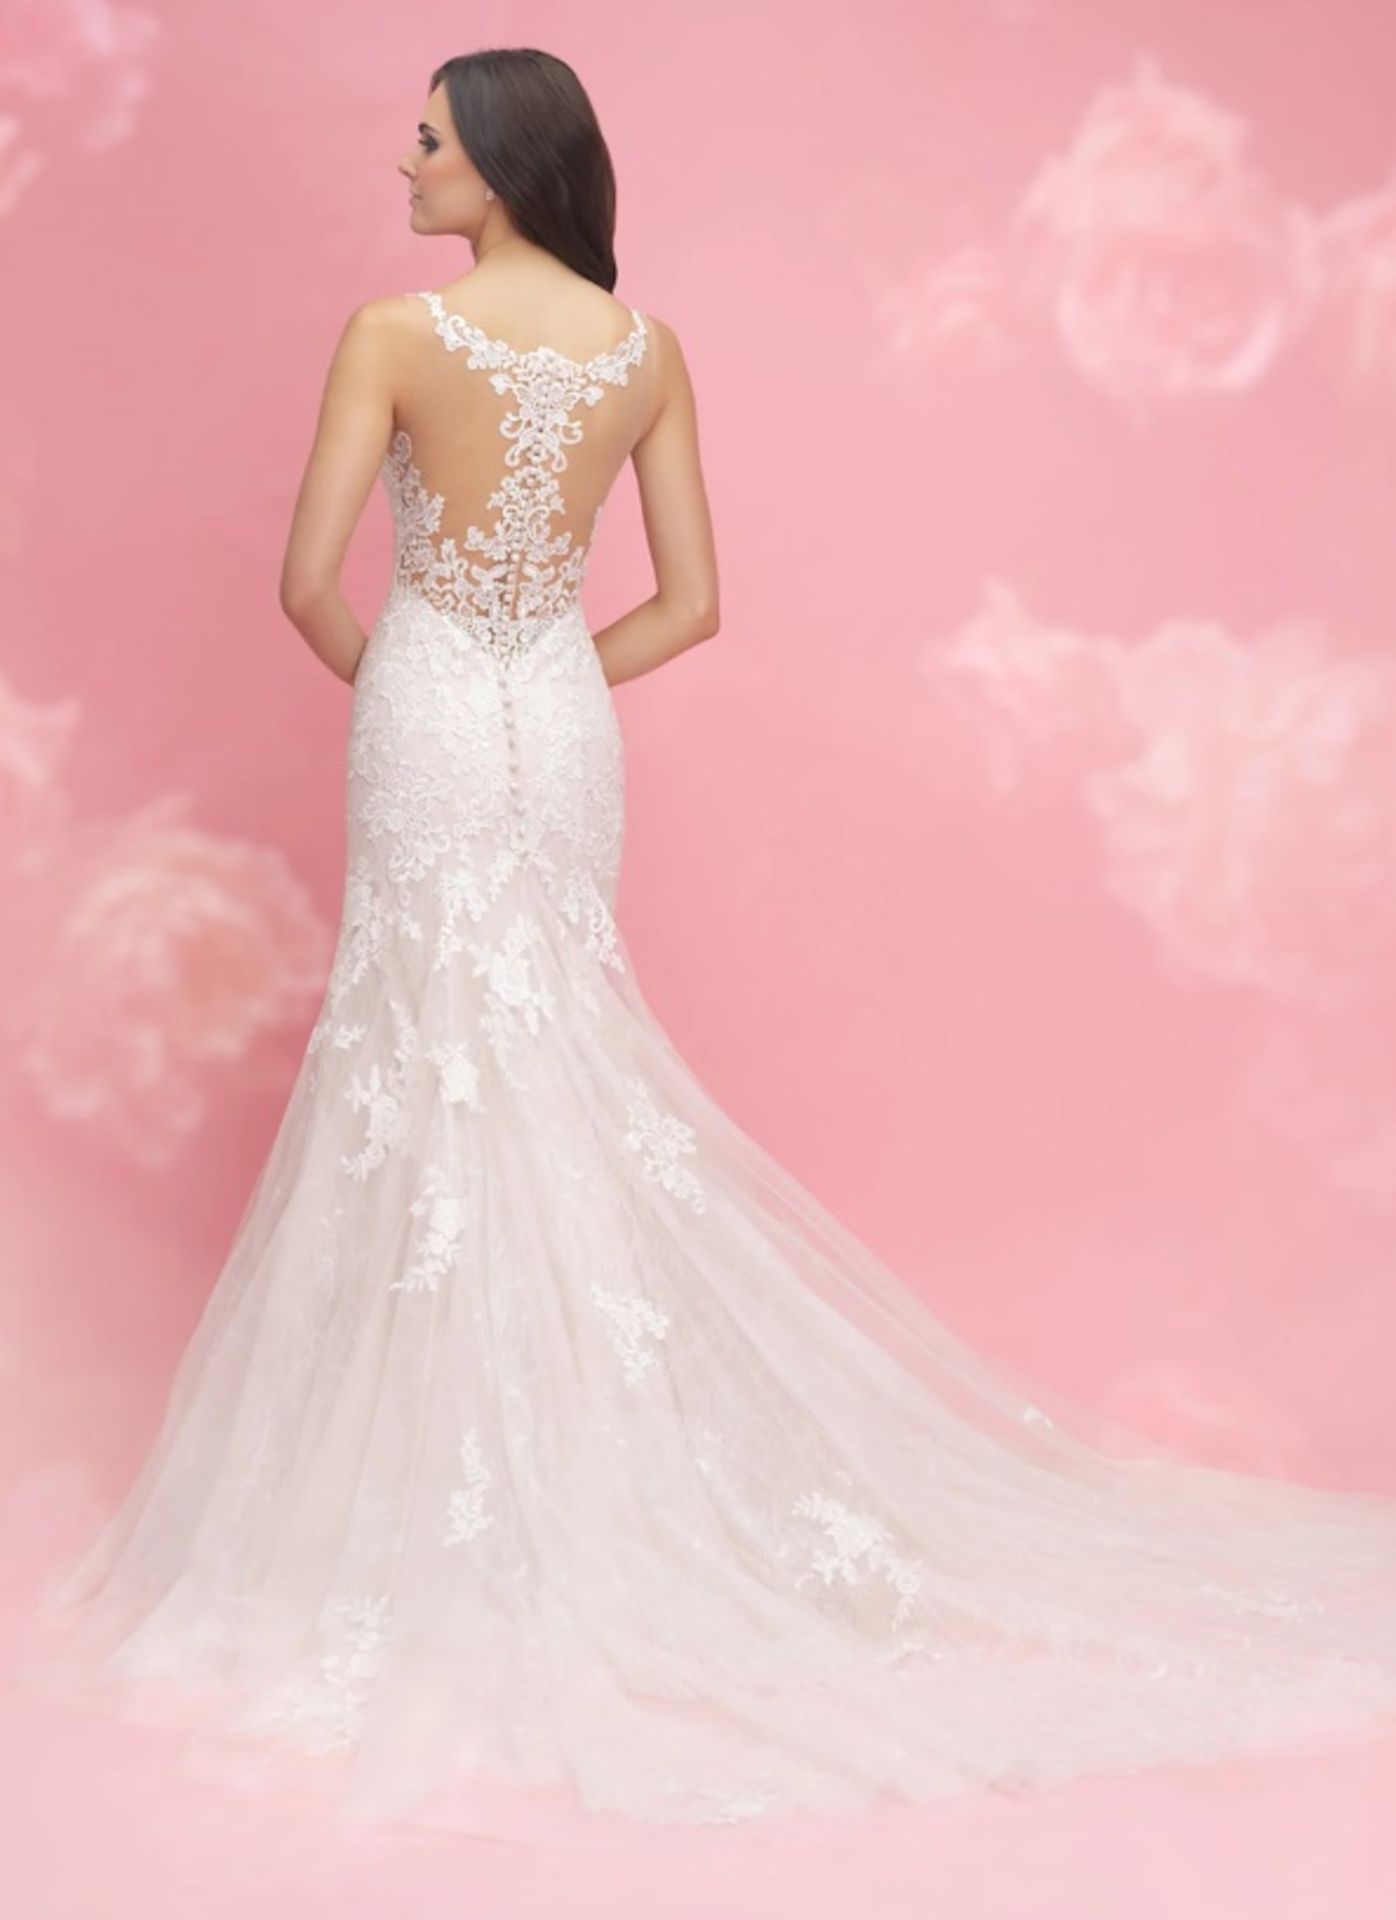 1 x ALLURE ROMANCE Layered Lace Designer Wedding Dress Bridal Gown - Colour: Ivory/Nude - Style: - Image 2 of 8